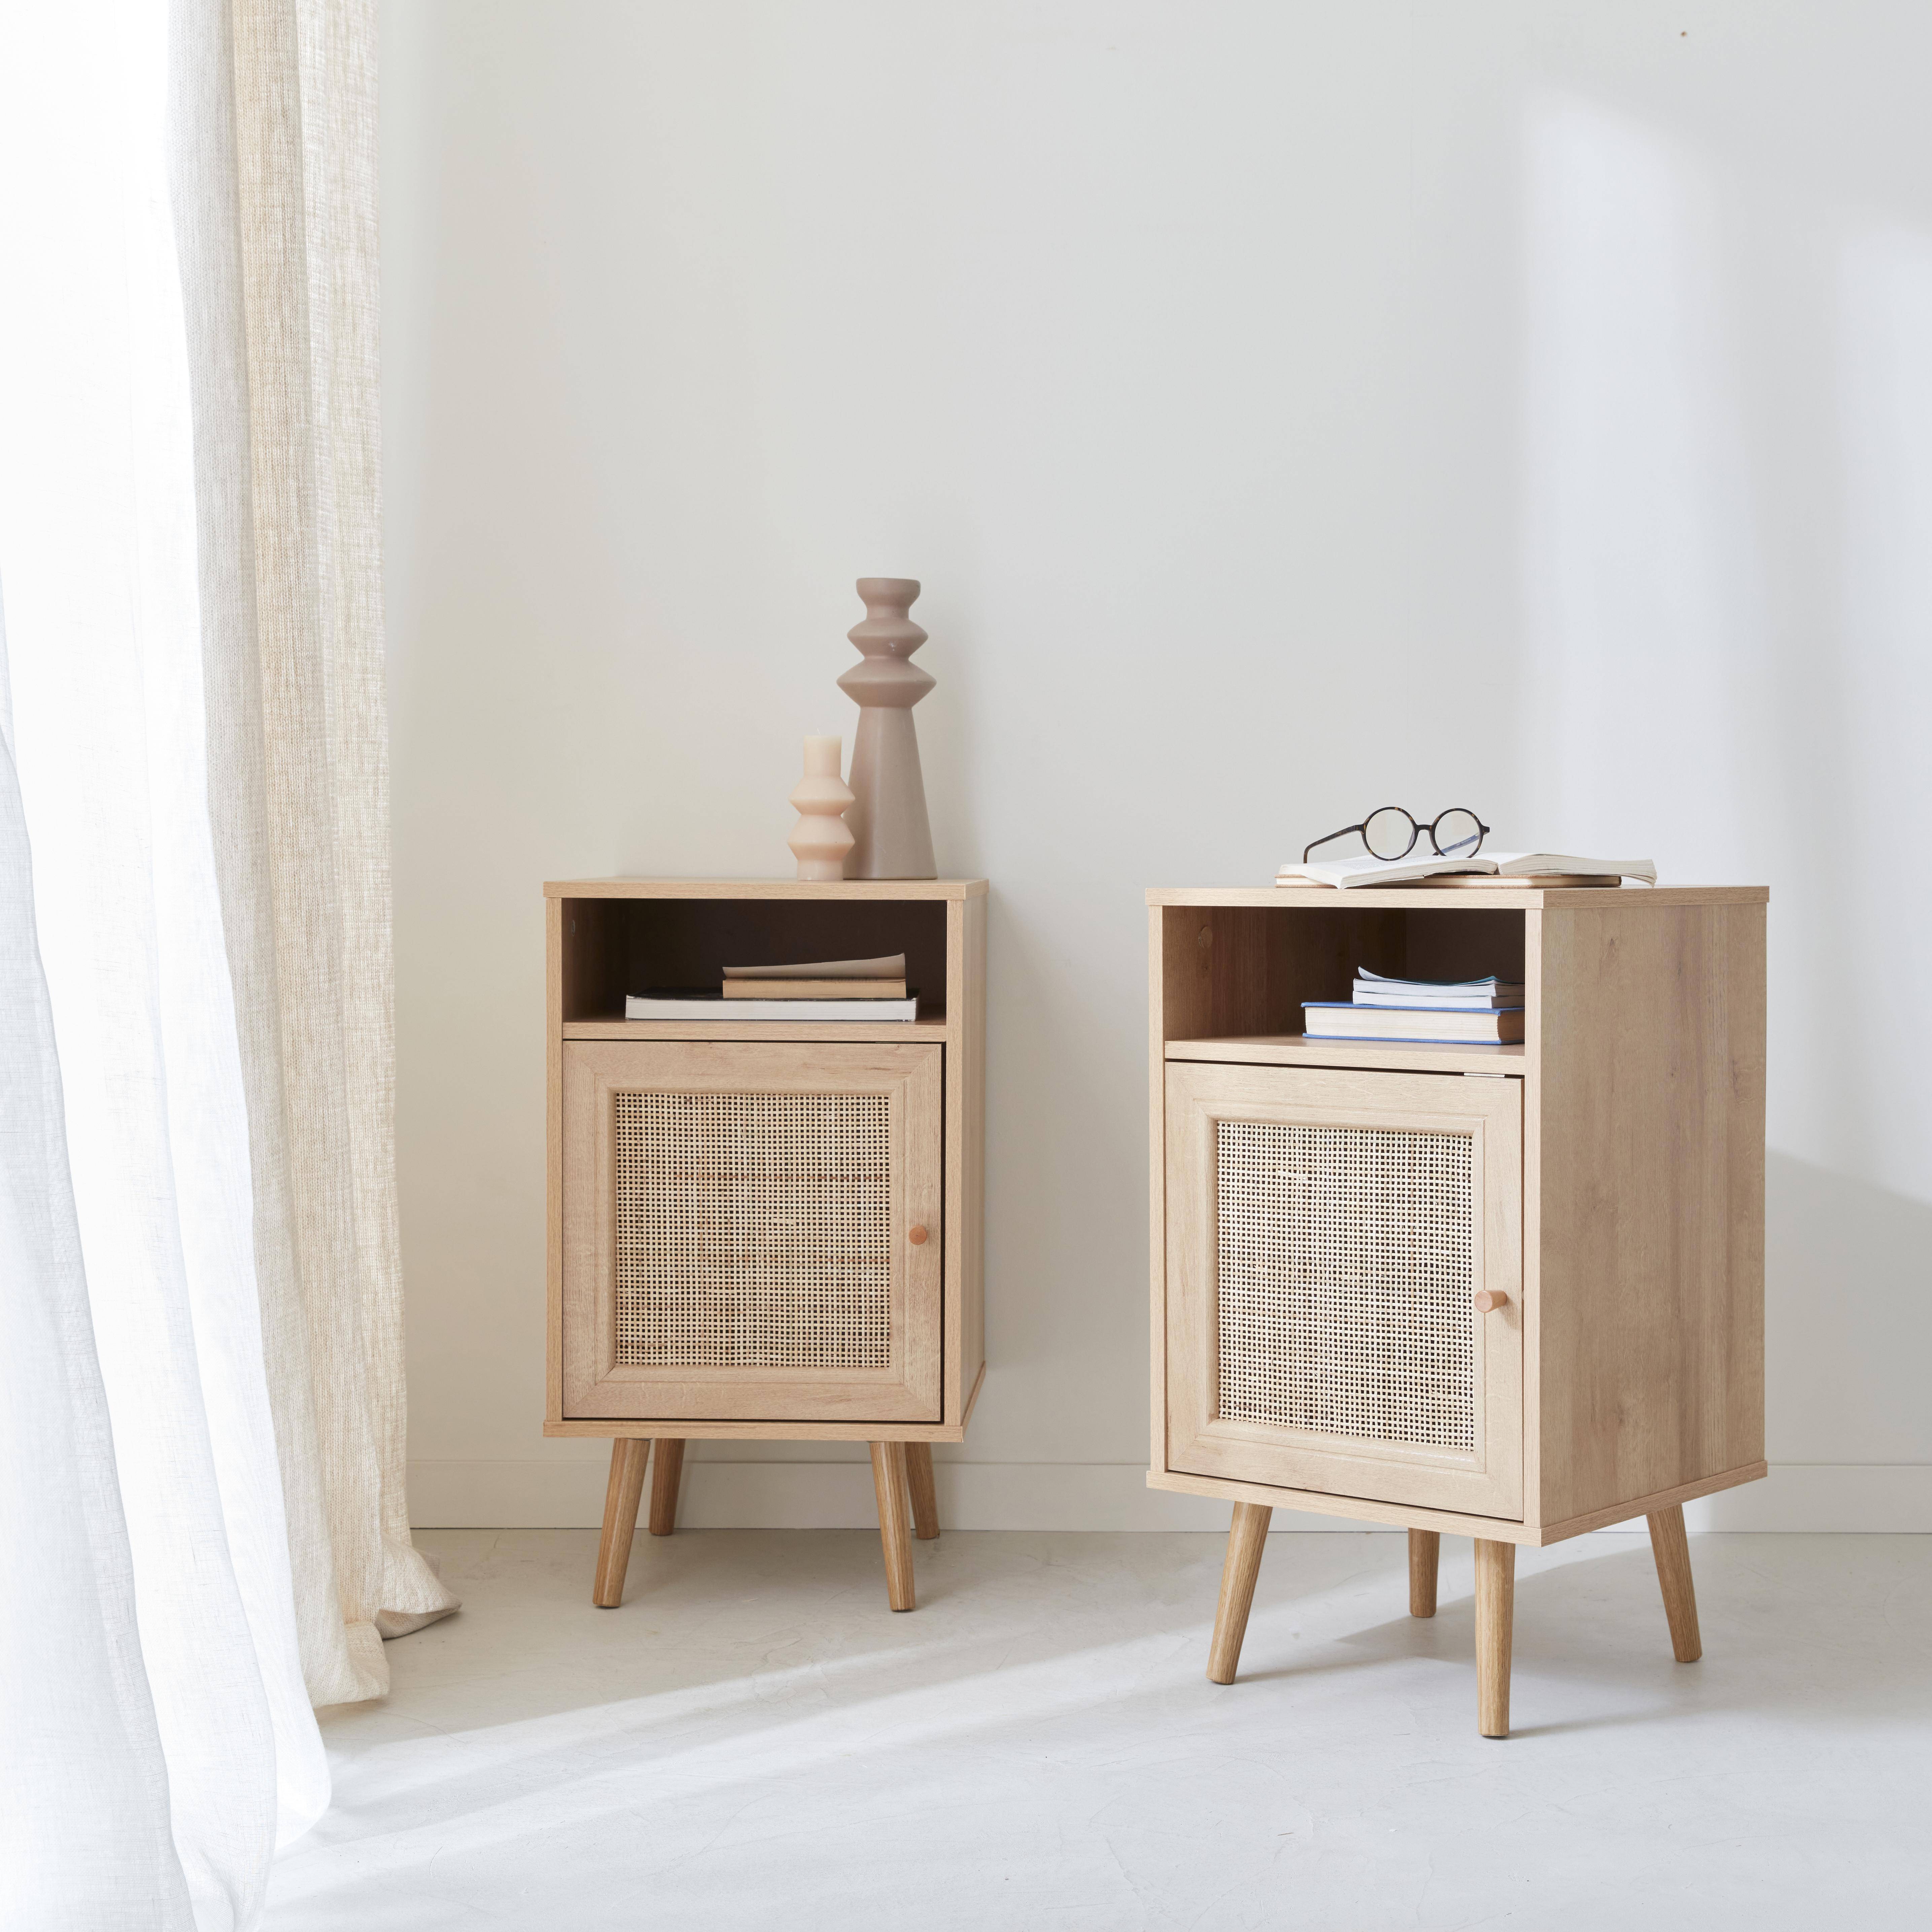 Pair of Scandi-style wood and cane rattan bedside tables with cupboard, 40x39x70cm - Boheme - Natural Wood colour Photo2